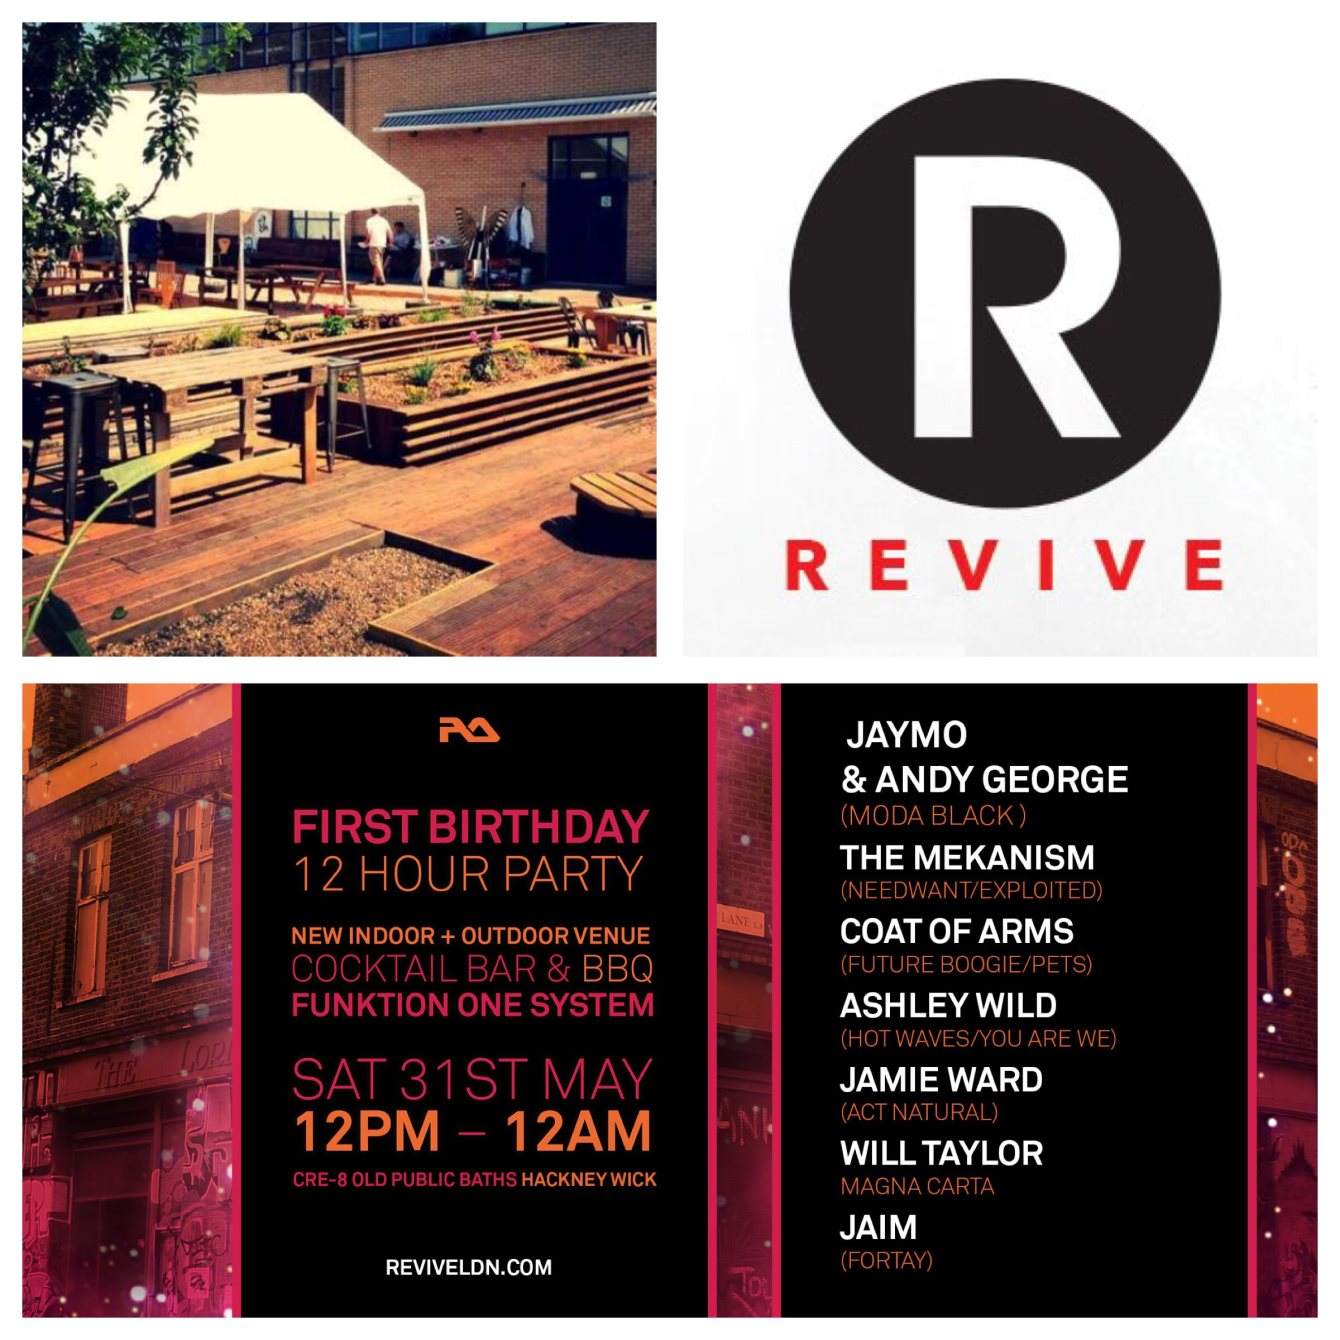 Revive London's 1st Birthday with Jaymo & Andy George, The Mekanism, Coat Of Arms, Ashley Wild - Página frontal